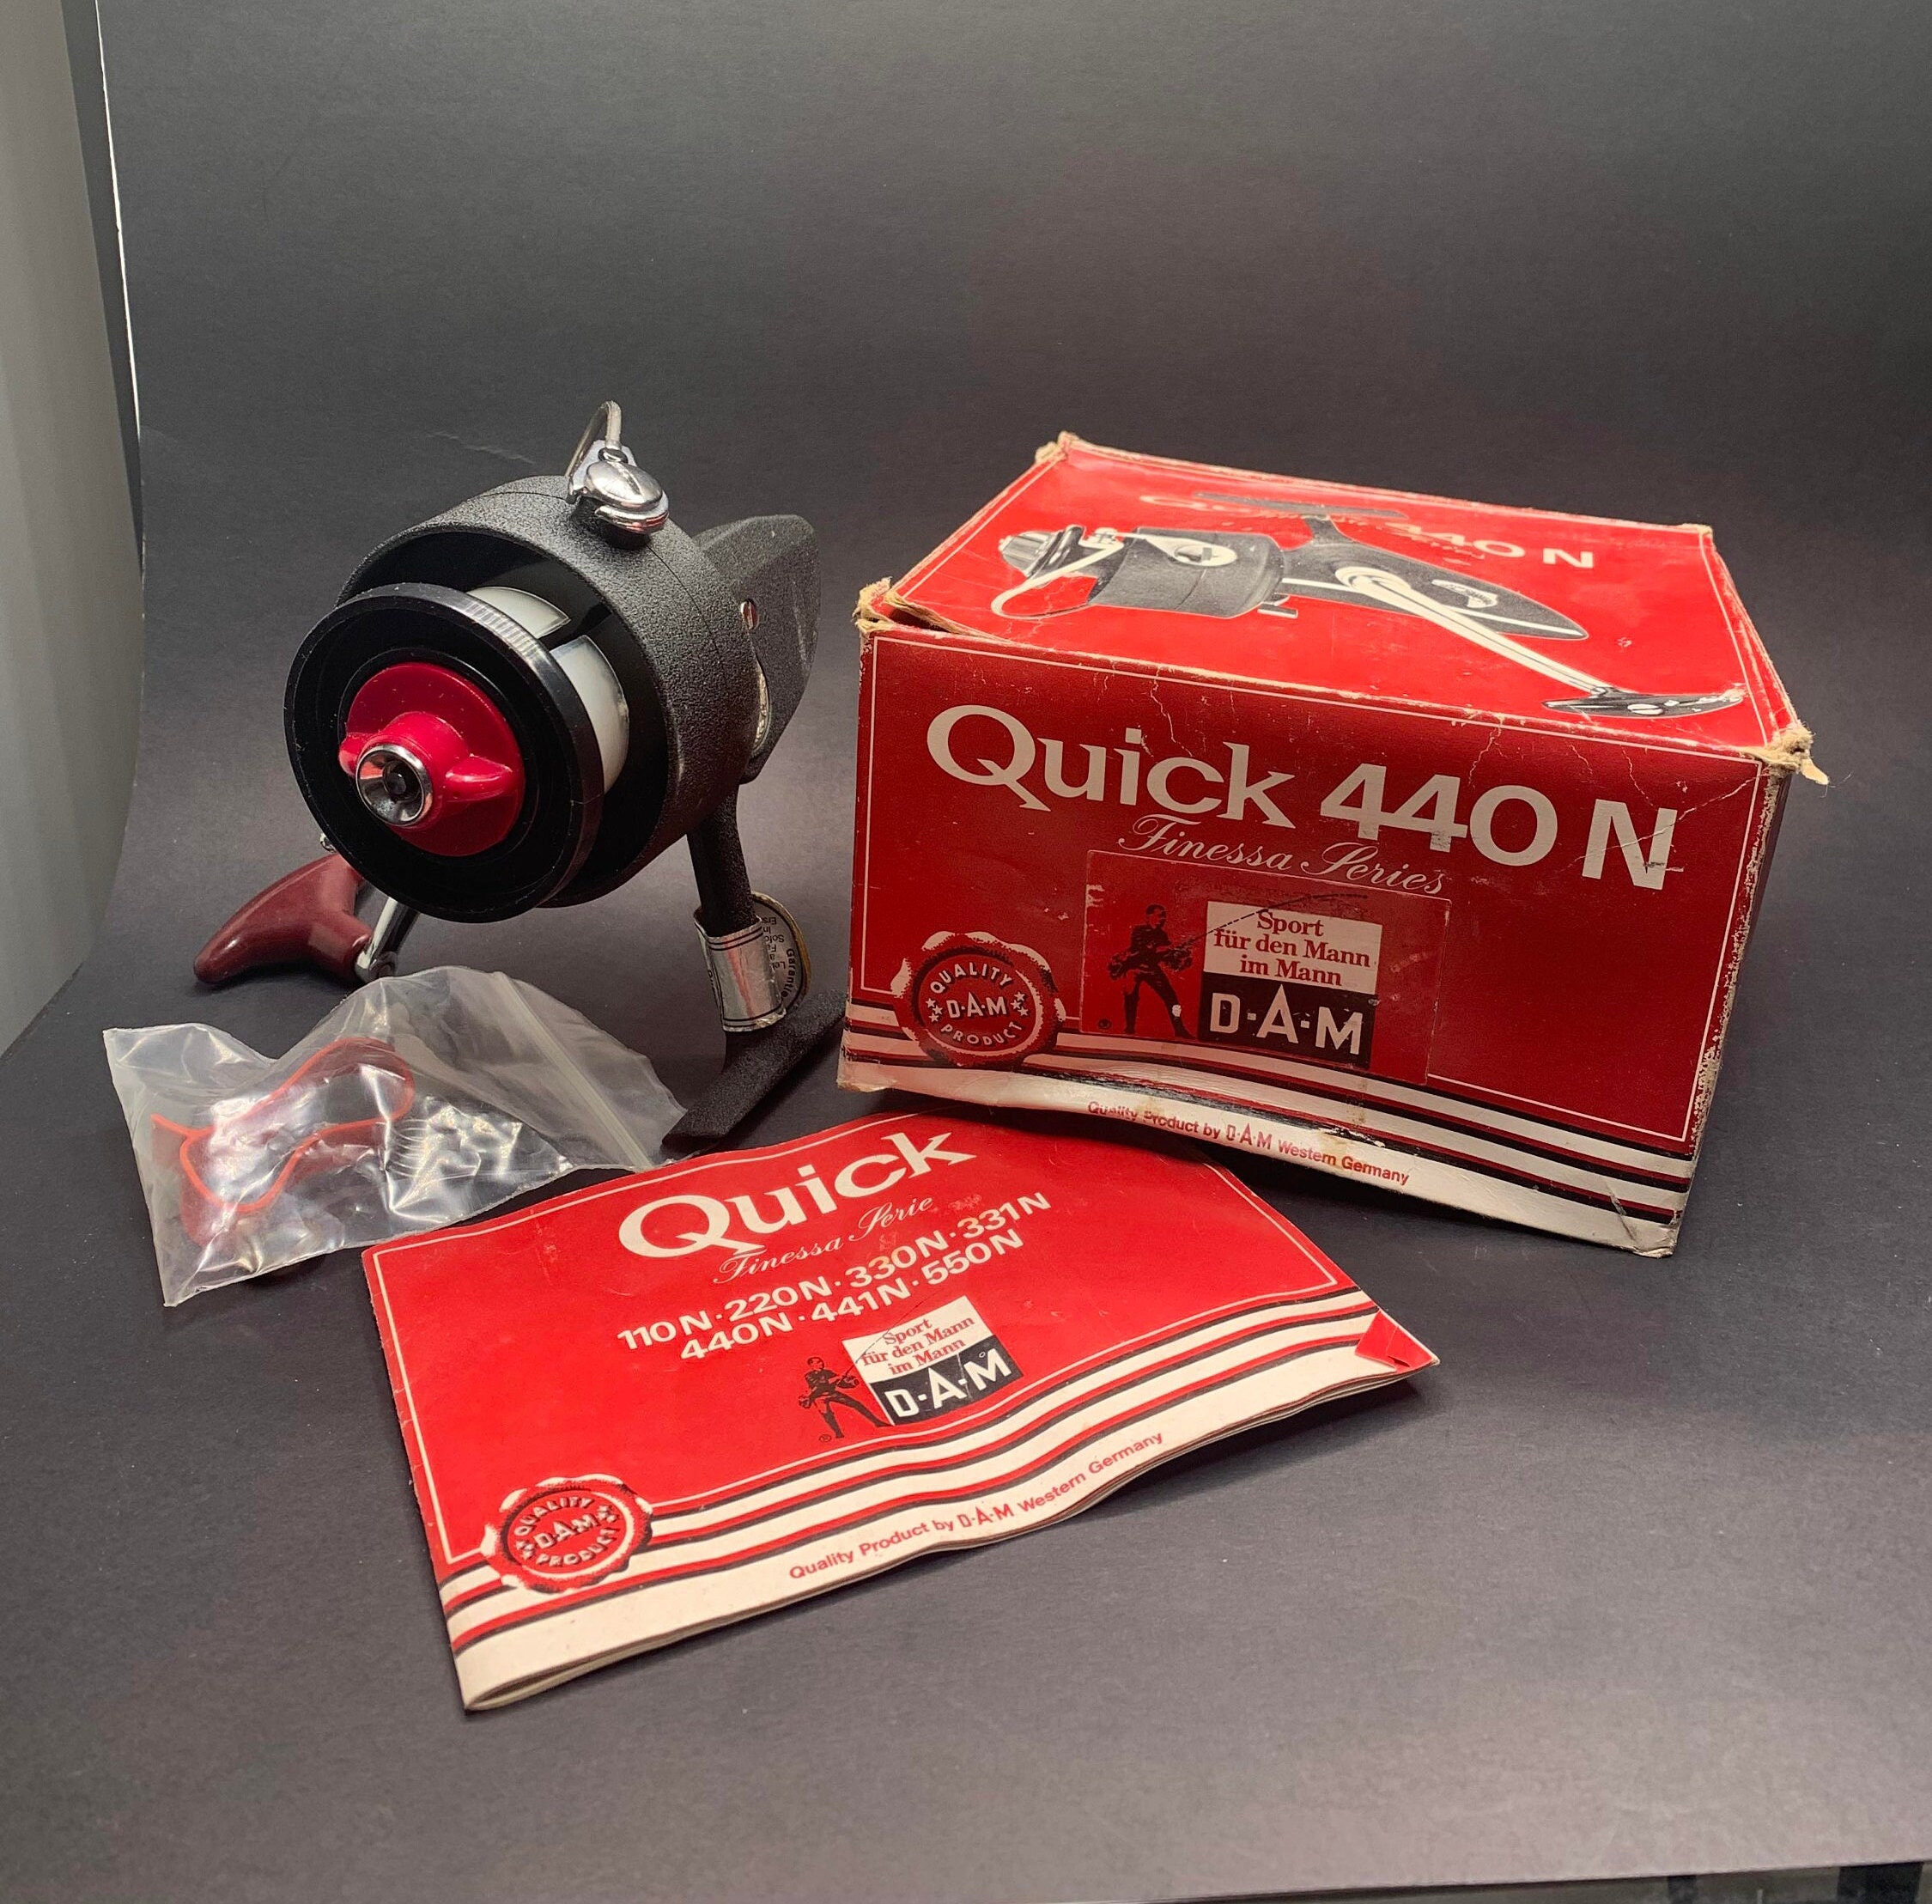 New Old Stock D.A.M. Quick 440N Fishing Spinning Reel With Box and